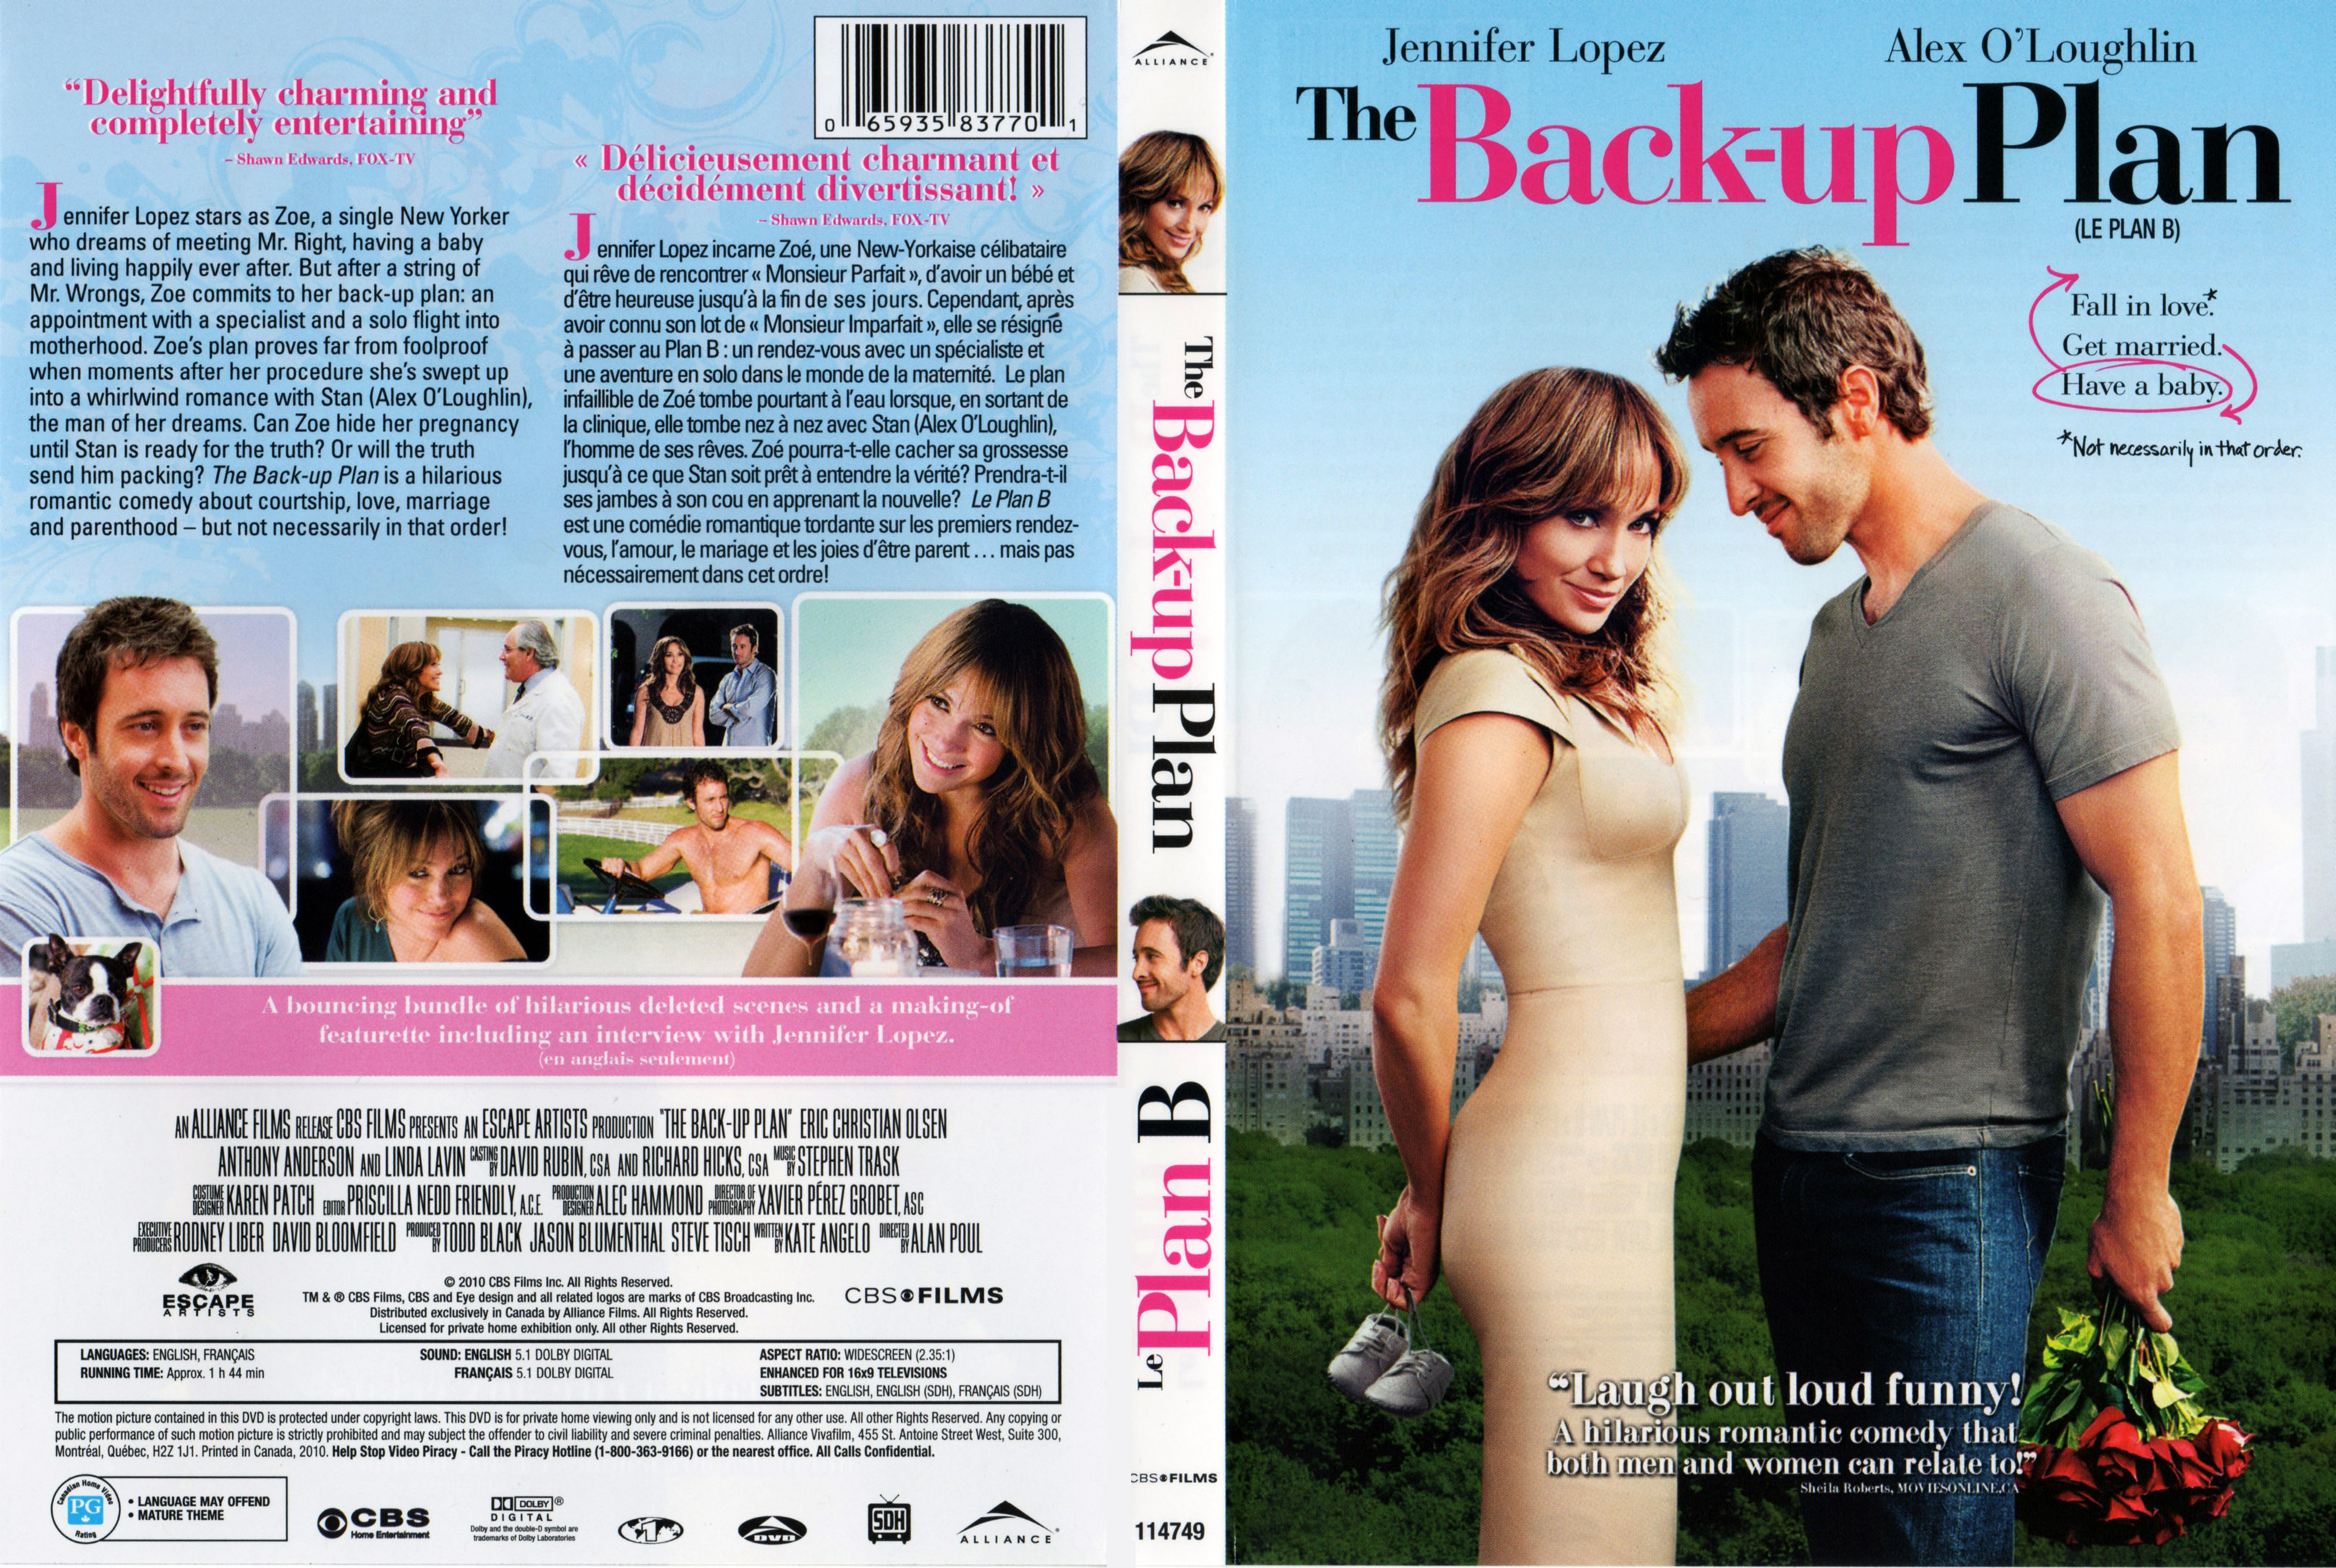 Jaquette DVD The Back-Up Plan - Le plan B (Canadienne)